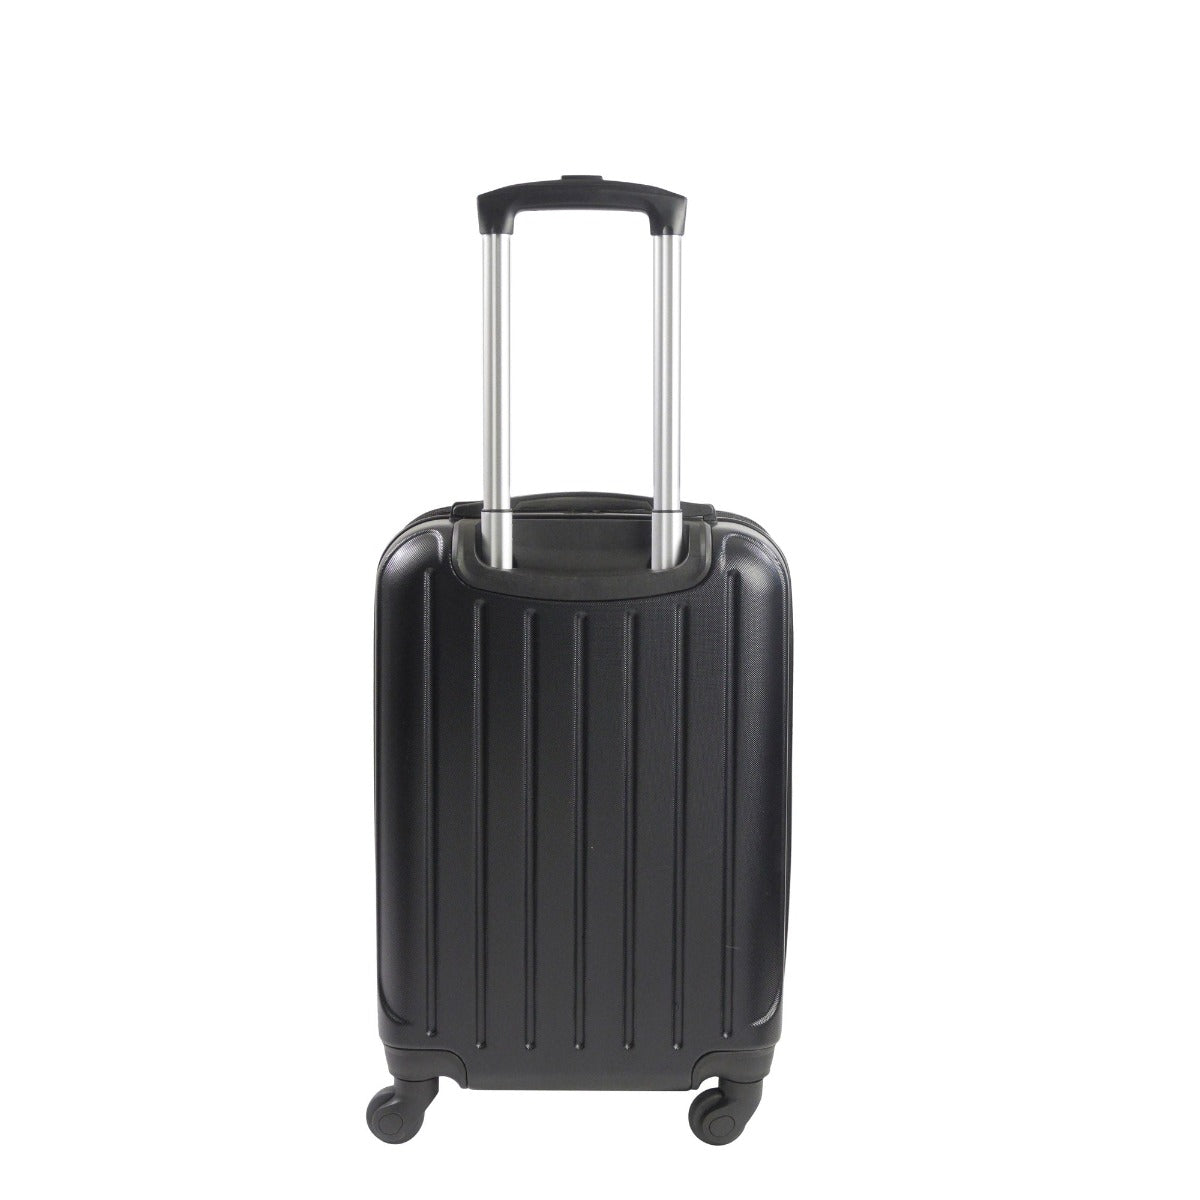 Pure 21-inch scratch resistant carry-on spinner suitcase affordable luggage in black